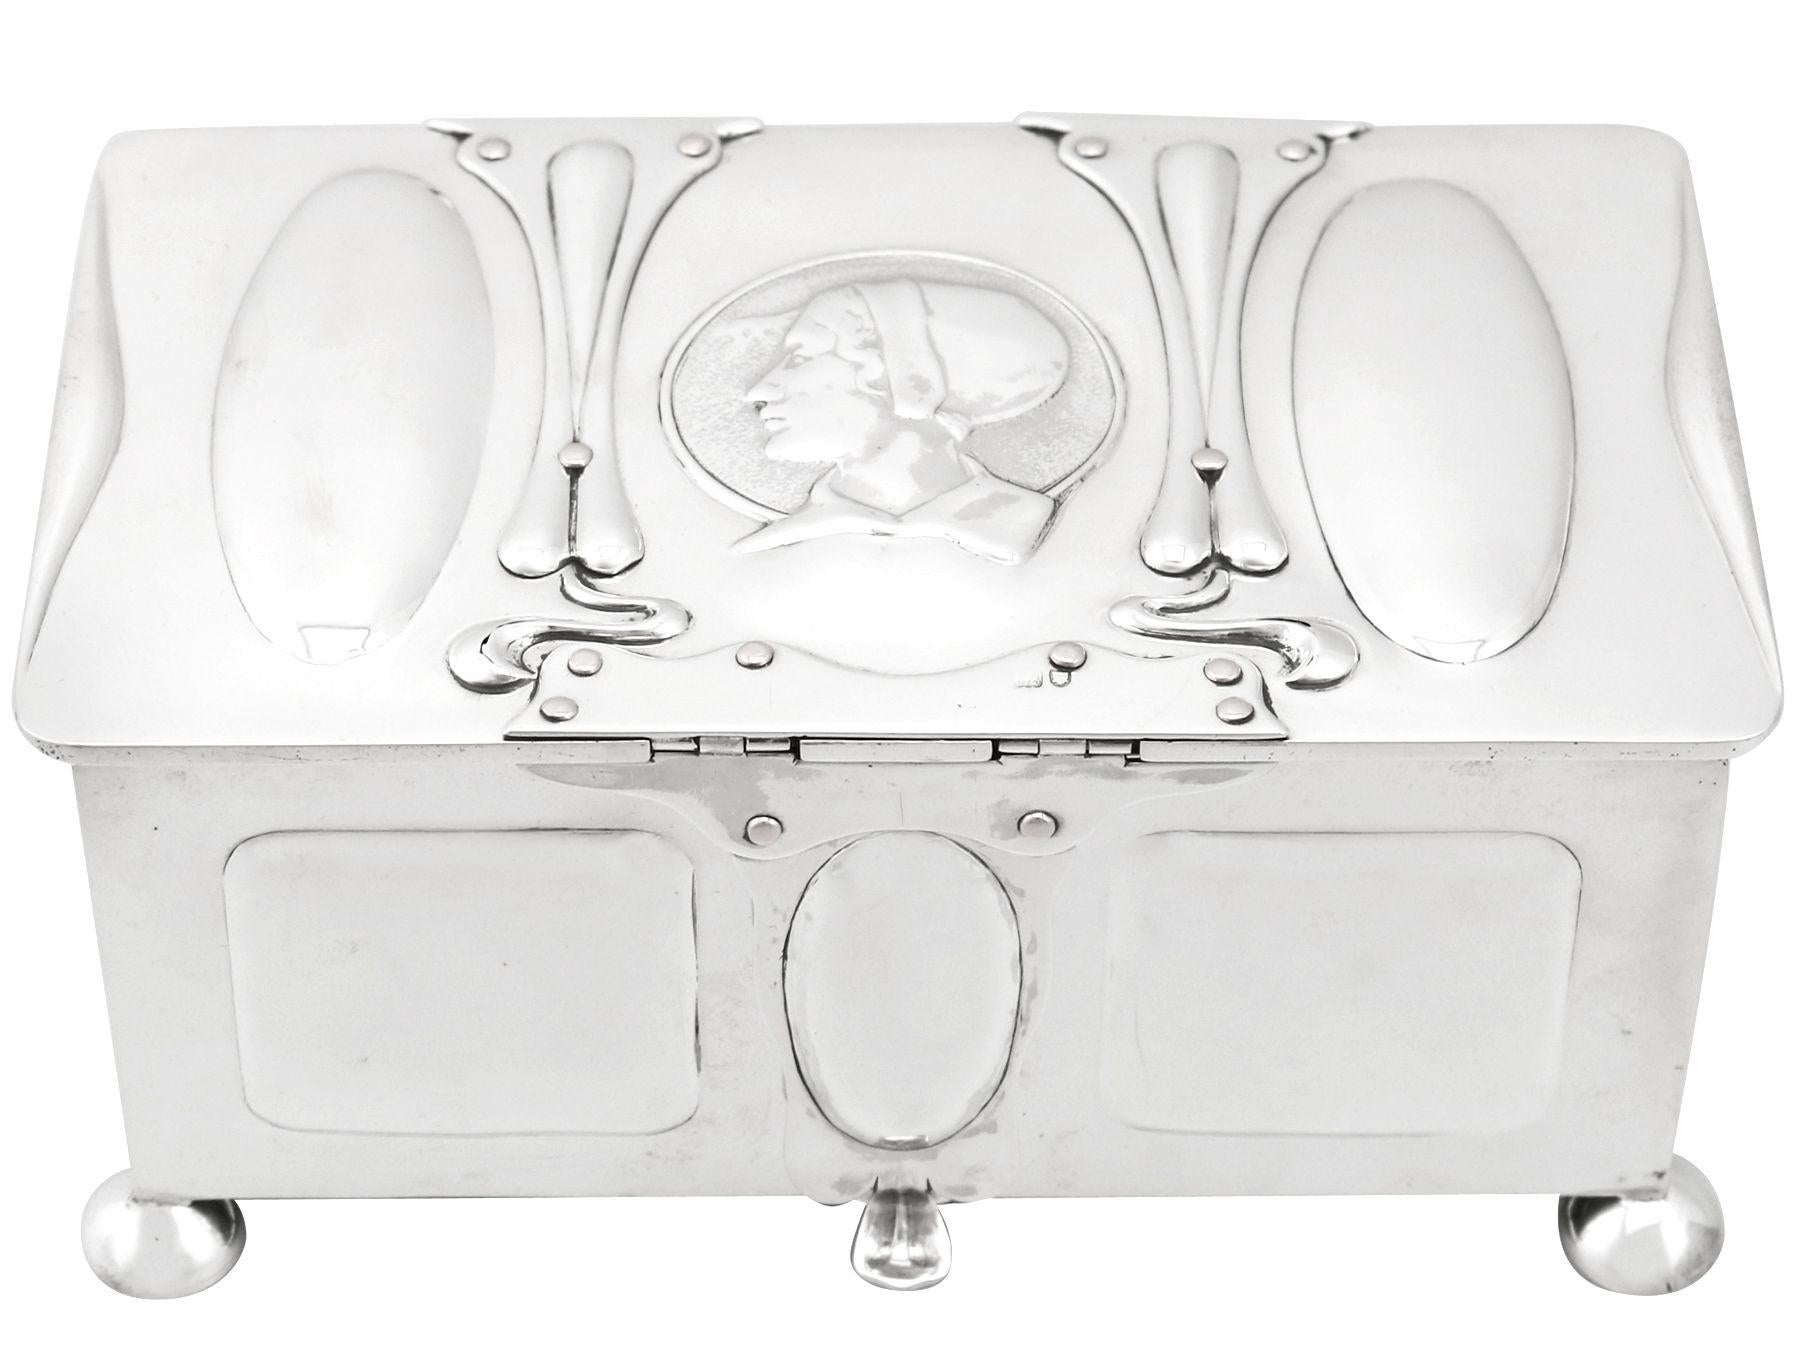 An exceptional, fine and impressive antique Edwardian English sterling silver jewelry casket made in the Art Nouveau style; an addition to the ornamental silverware collection.

This exceptional Edwardian sterling silver jewelry casket has a